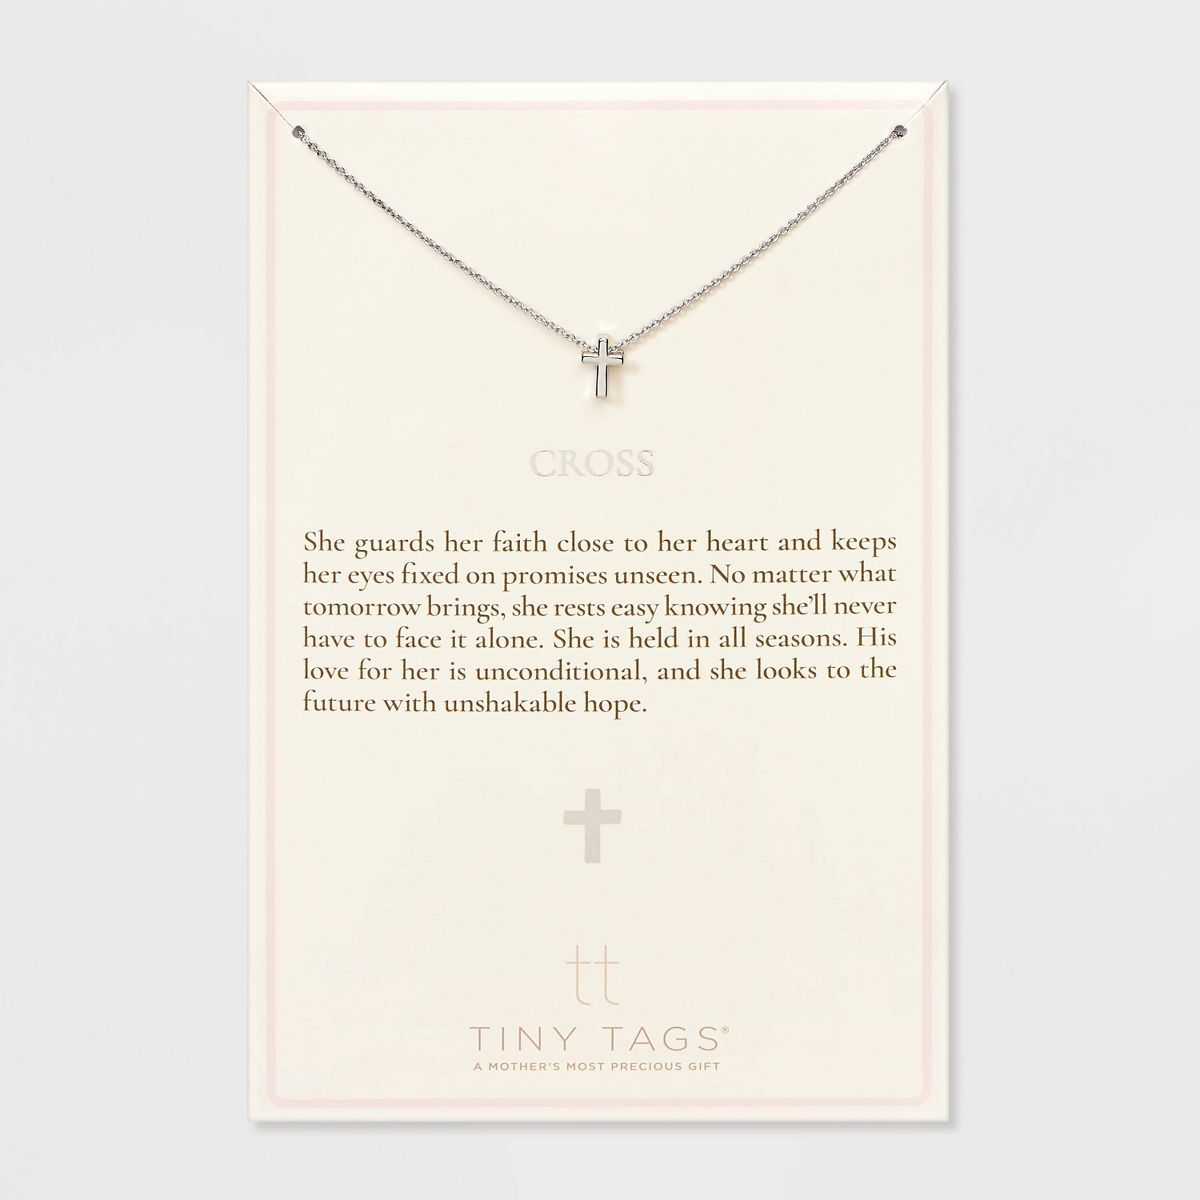 Tiny Tags Silver Plated Cross Chain Necklace - Silver | Target